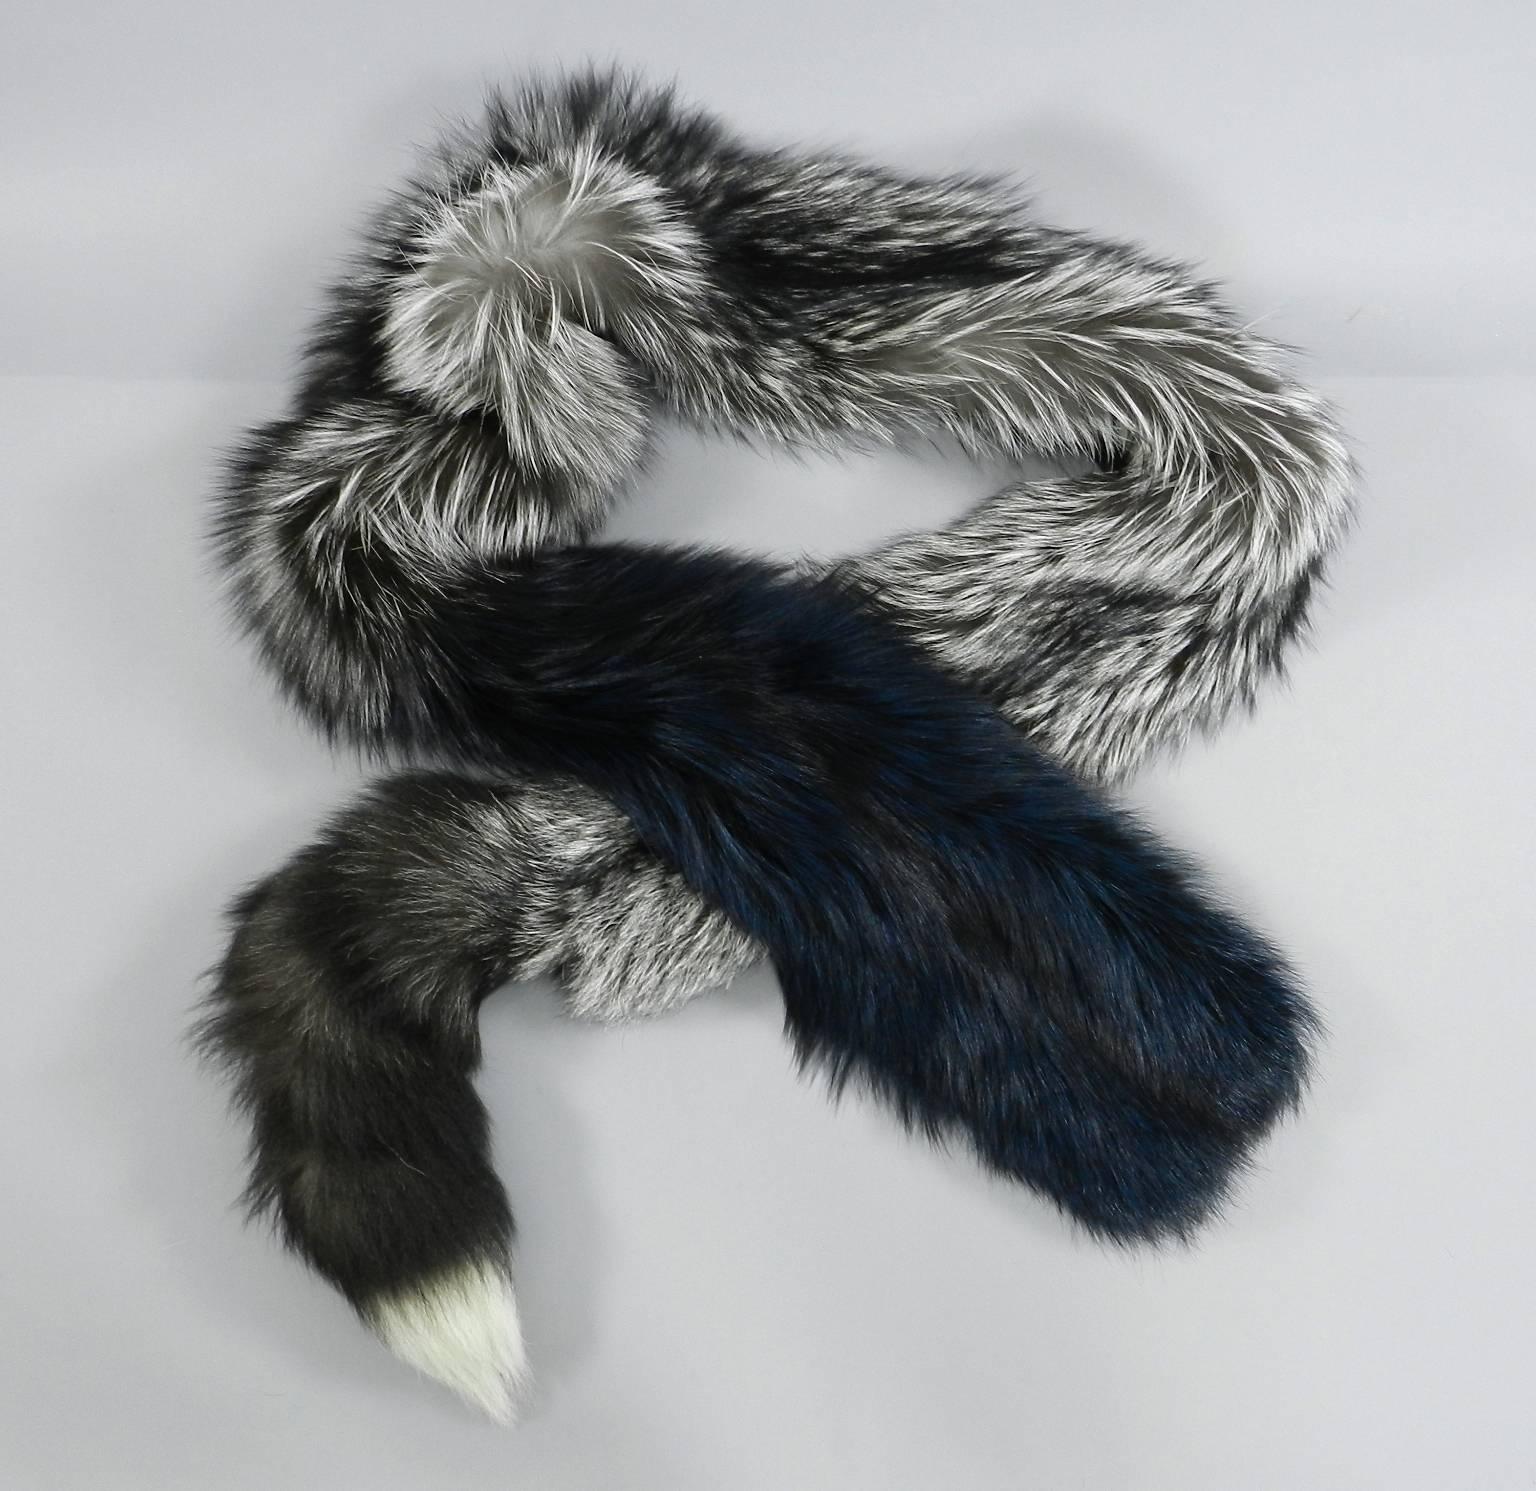 Lanvin fall 2010 Silver fox fur scarf / stole with 1 sleeve 2